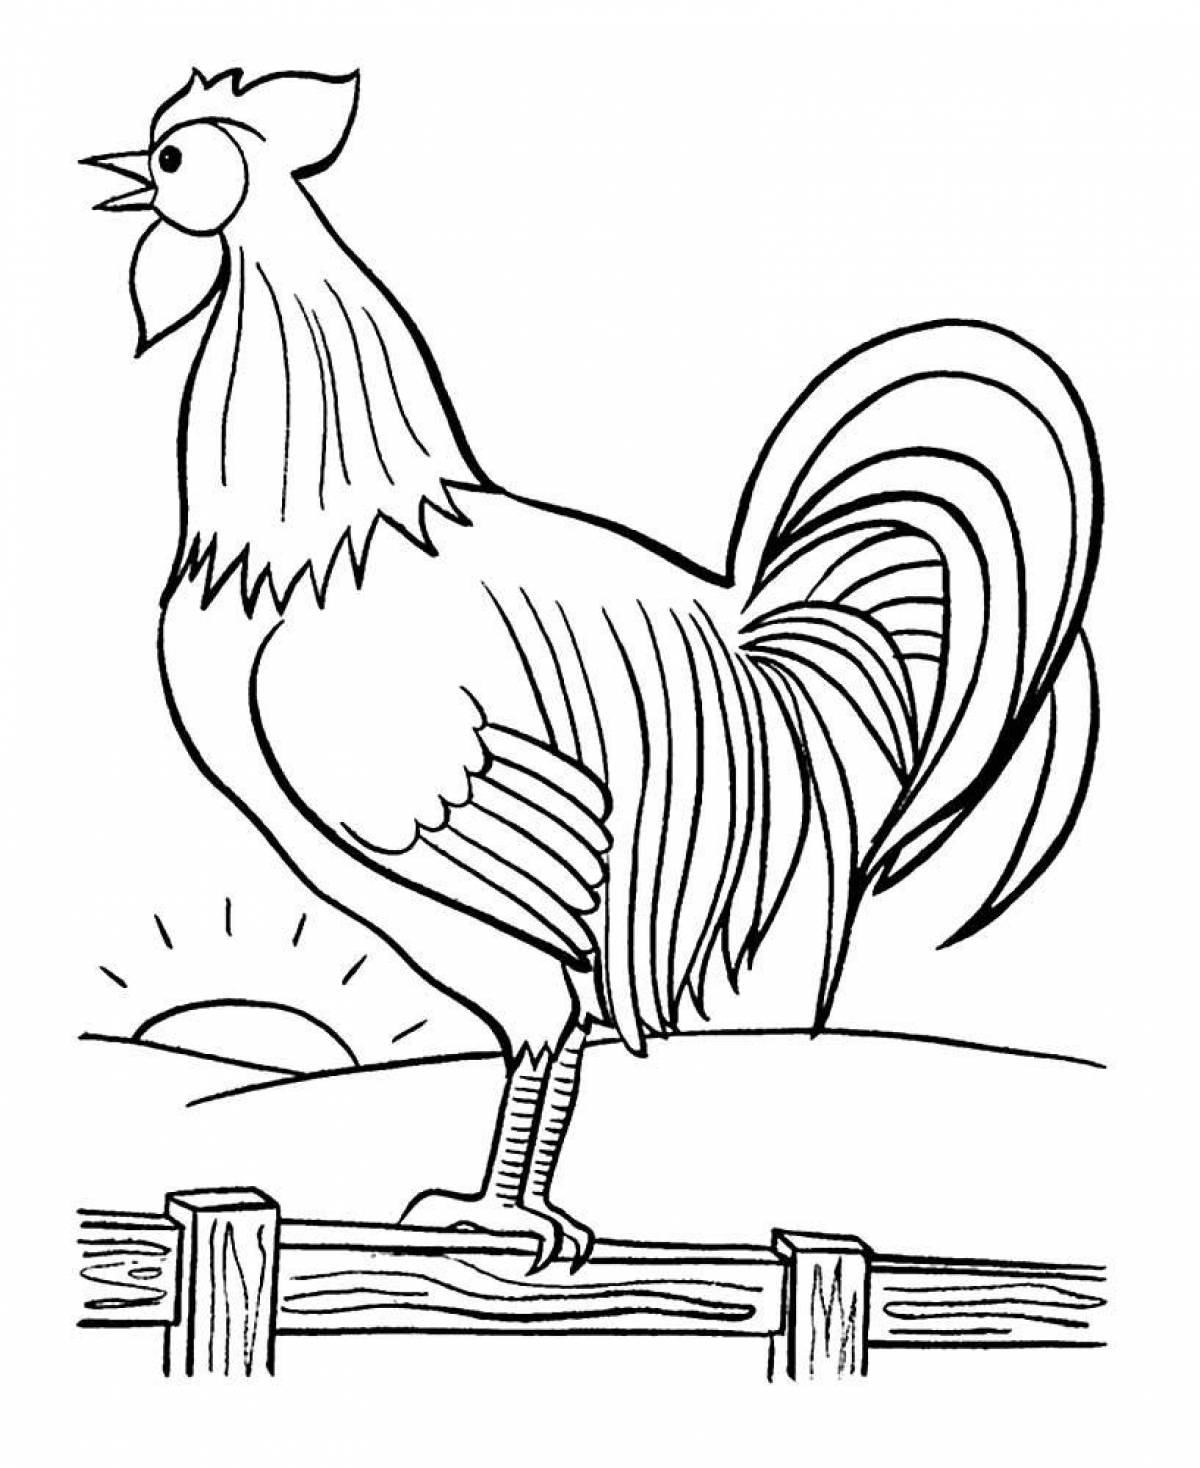 Colouring bright rooster